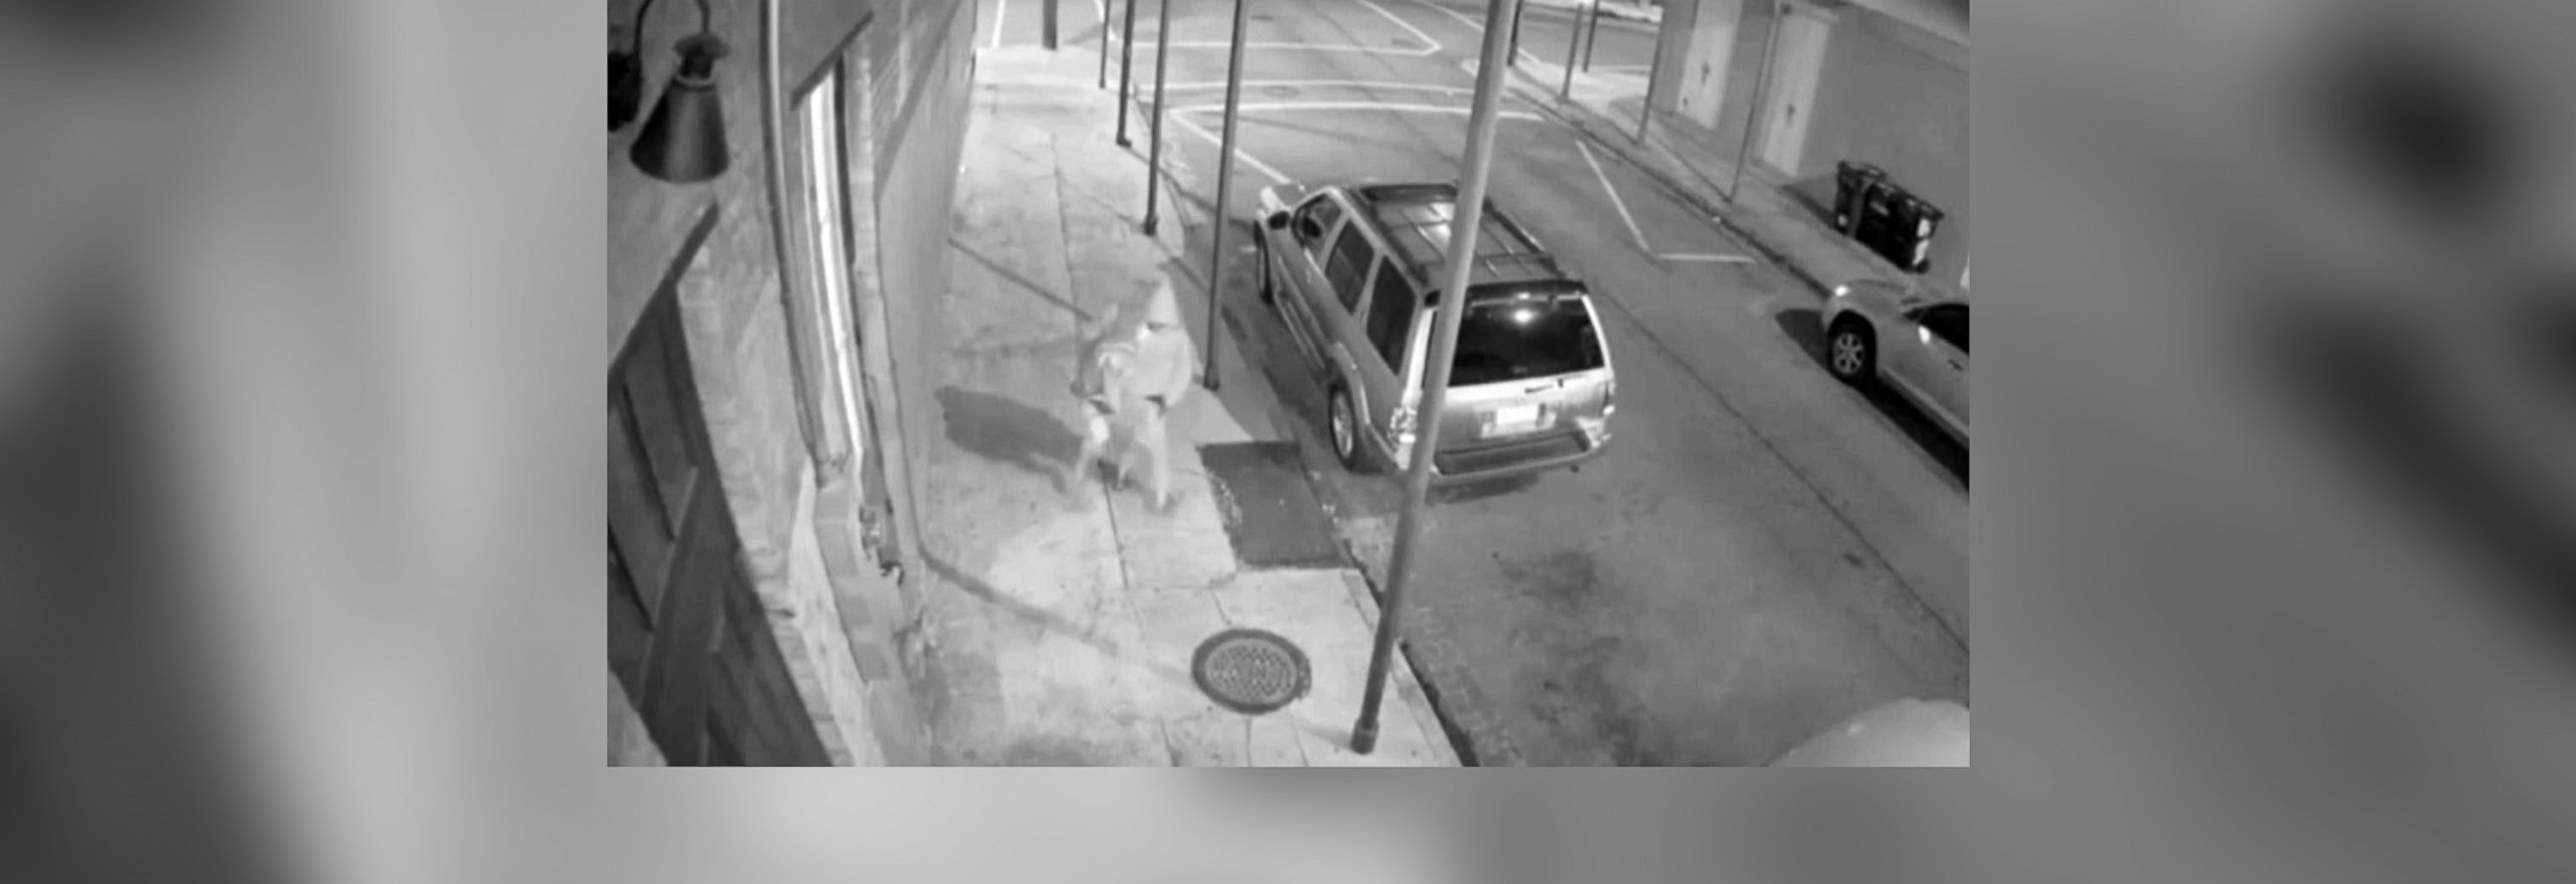 PHOTO: Surveillance footage shows the suspect, identified by police as Euric Cain, carrying a woman towards his car on Nov. 20, 2015.